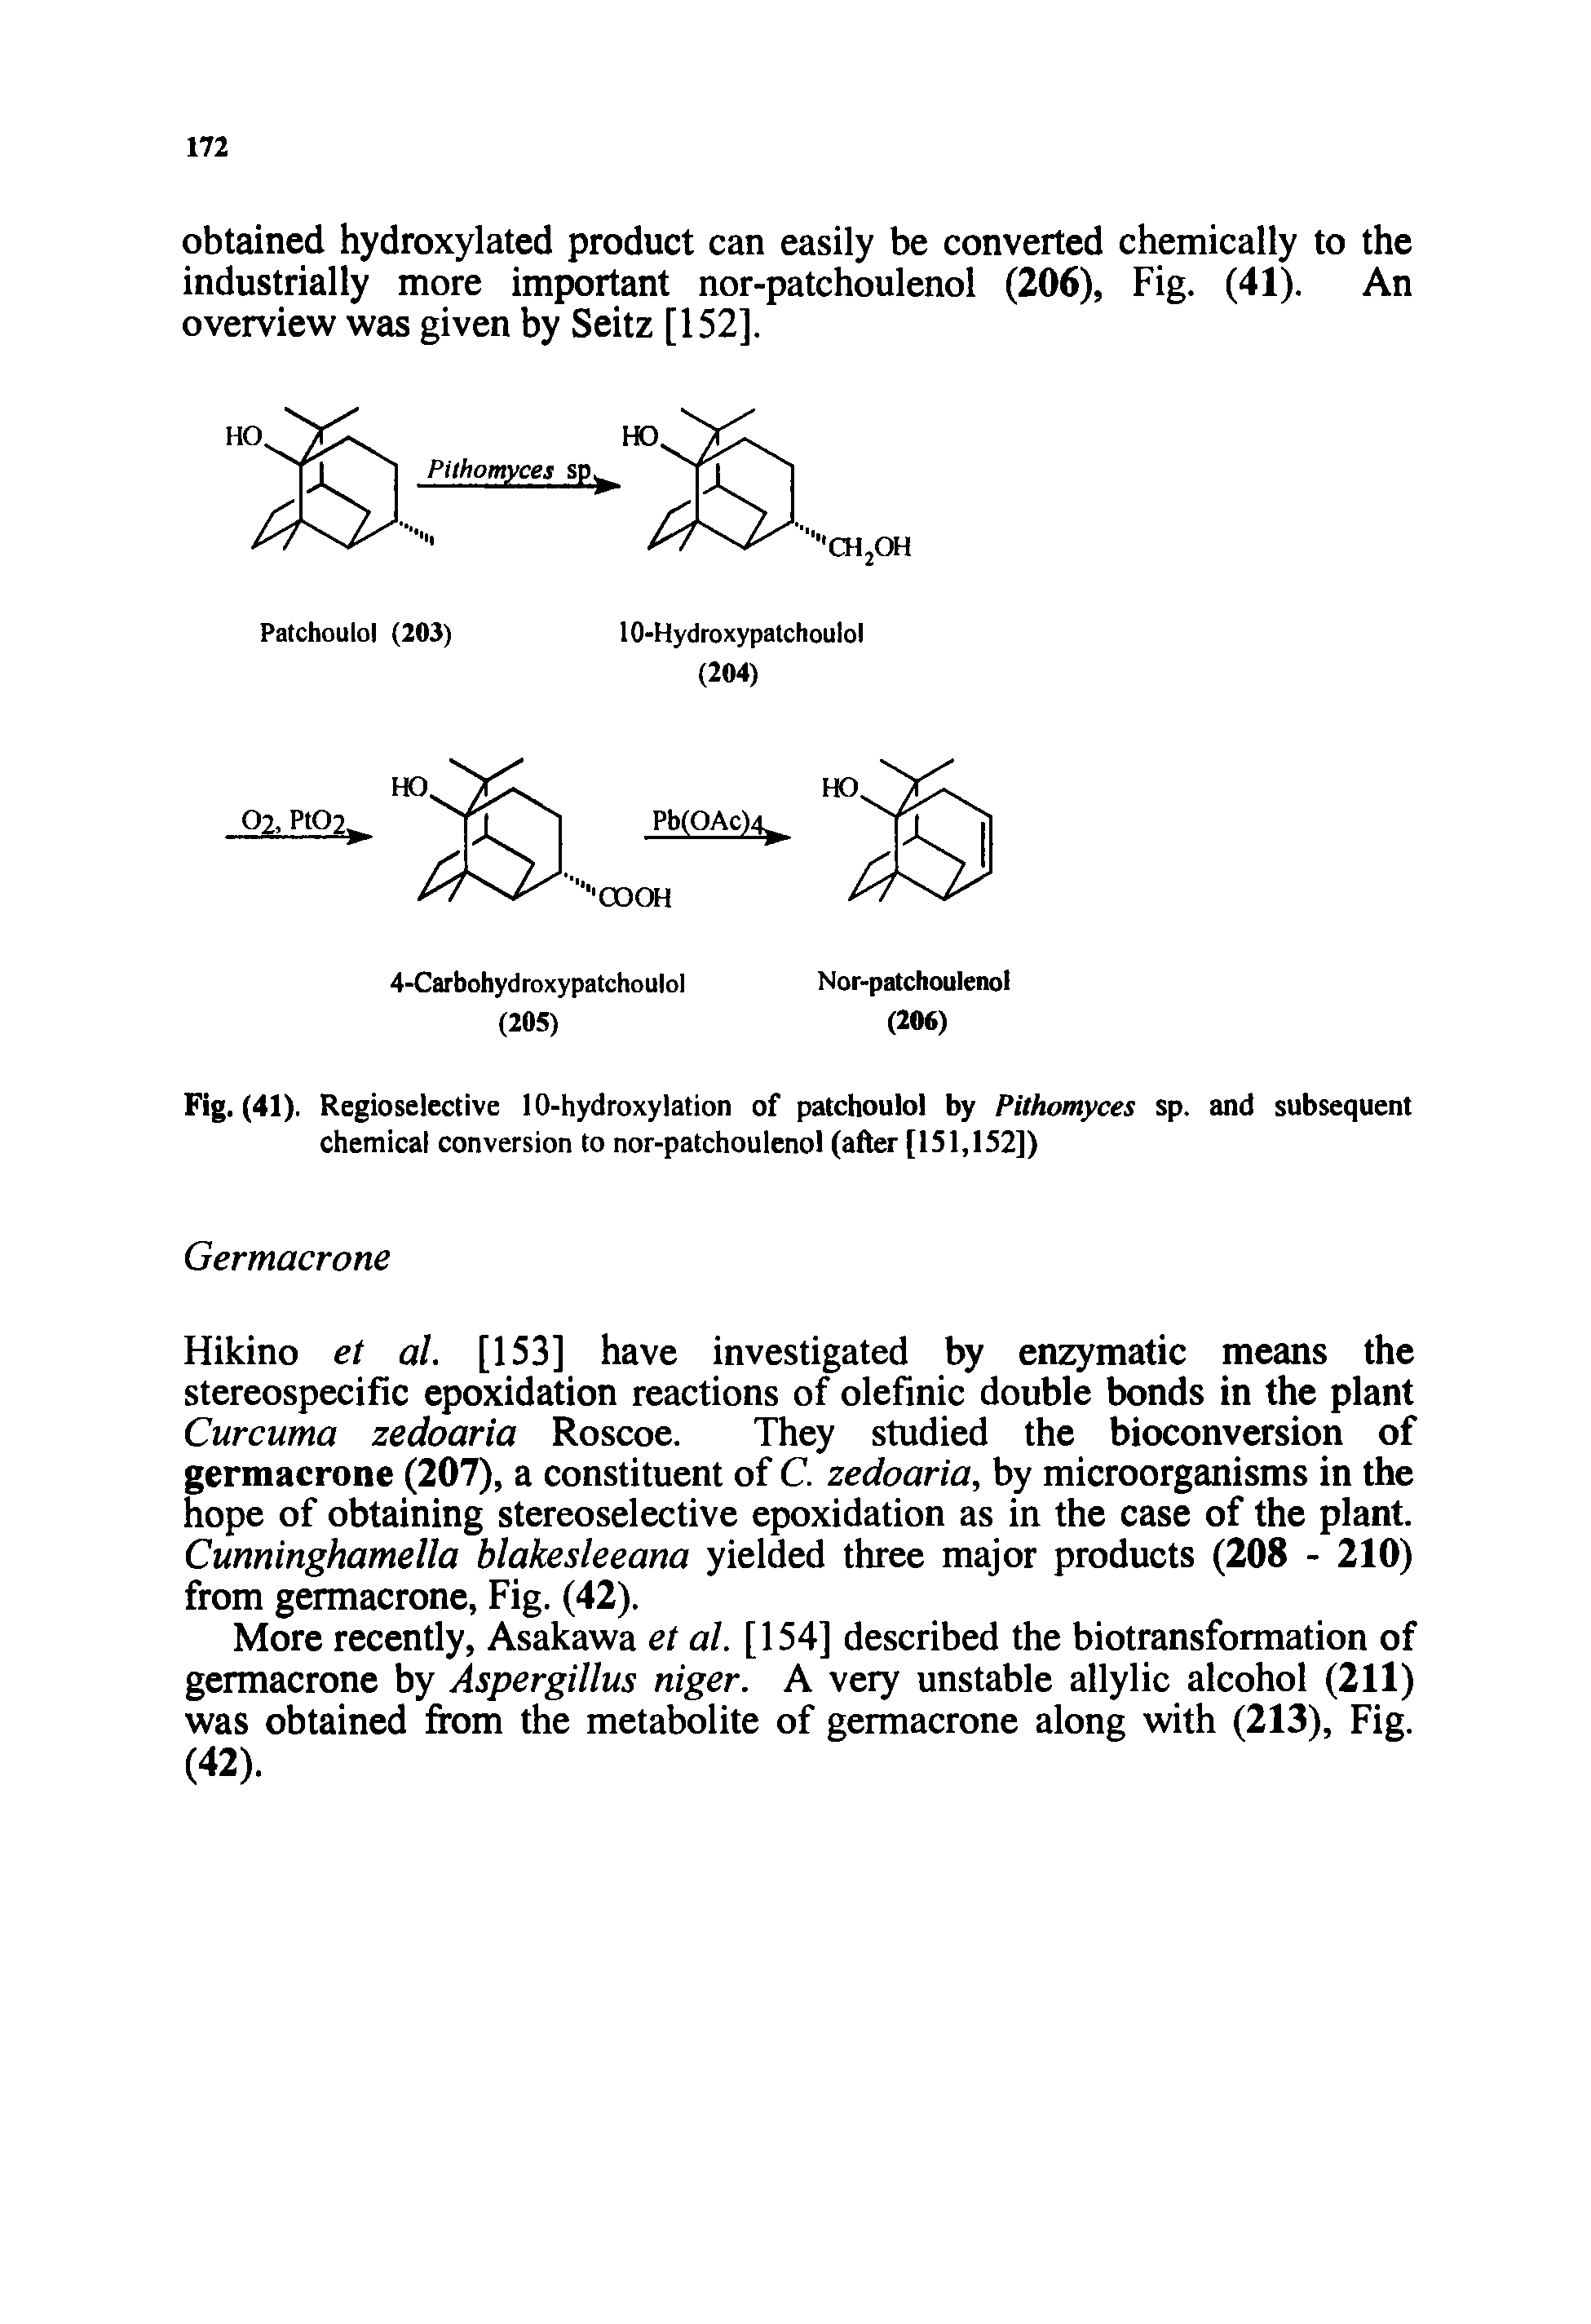 Fig. (41). Regioselective 10-hydroxylation of patchoulol by Pithomyces sp. and subsequent chemical conversion to nor-patchoulenol (after [151,152])...